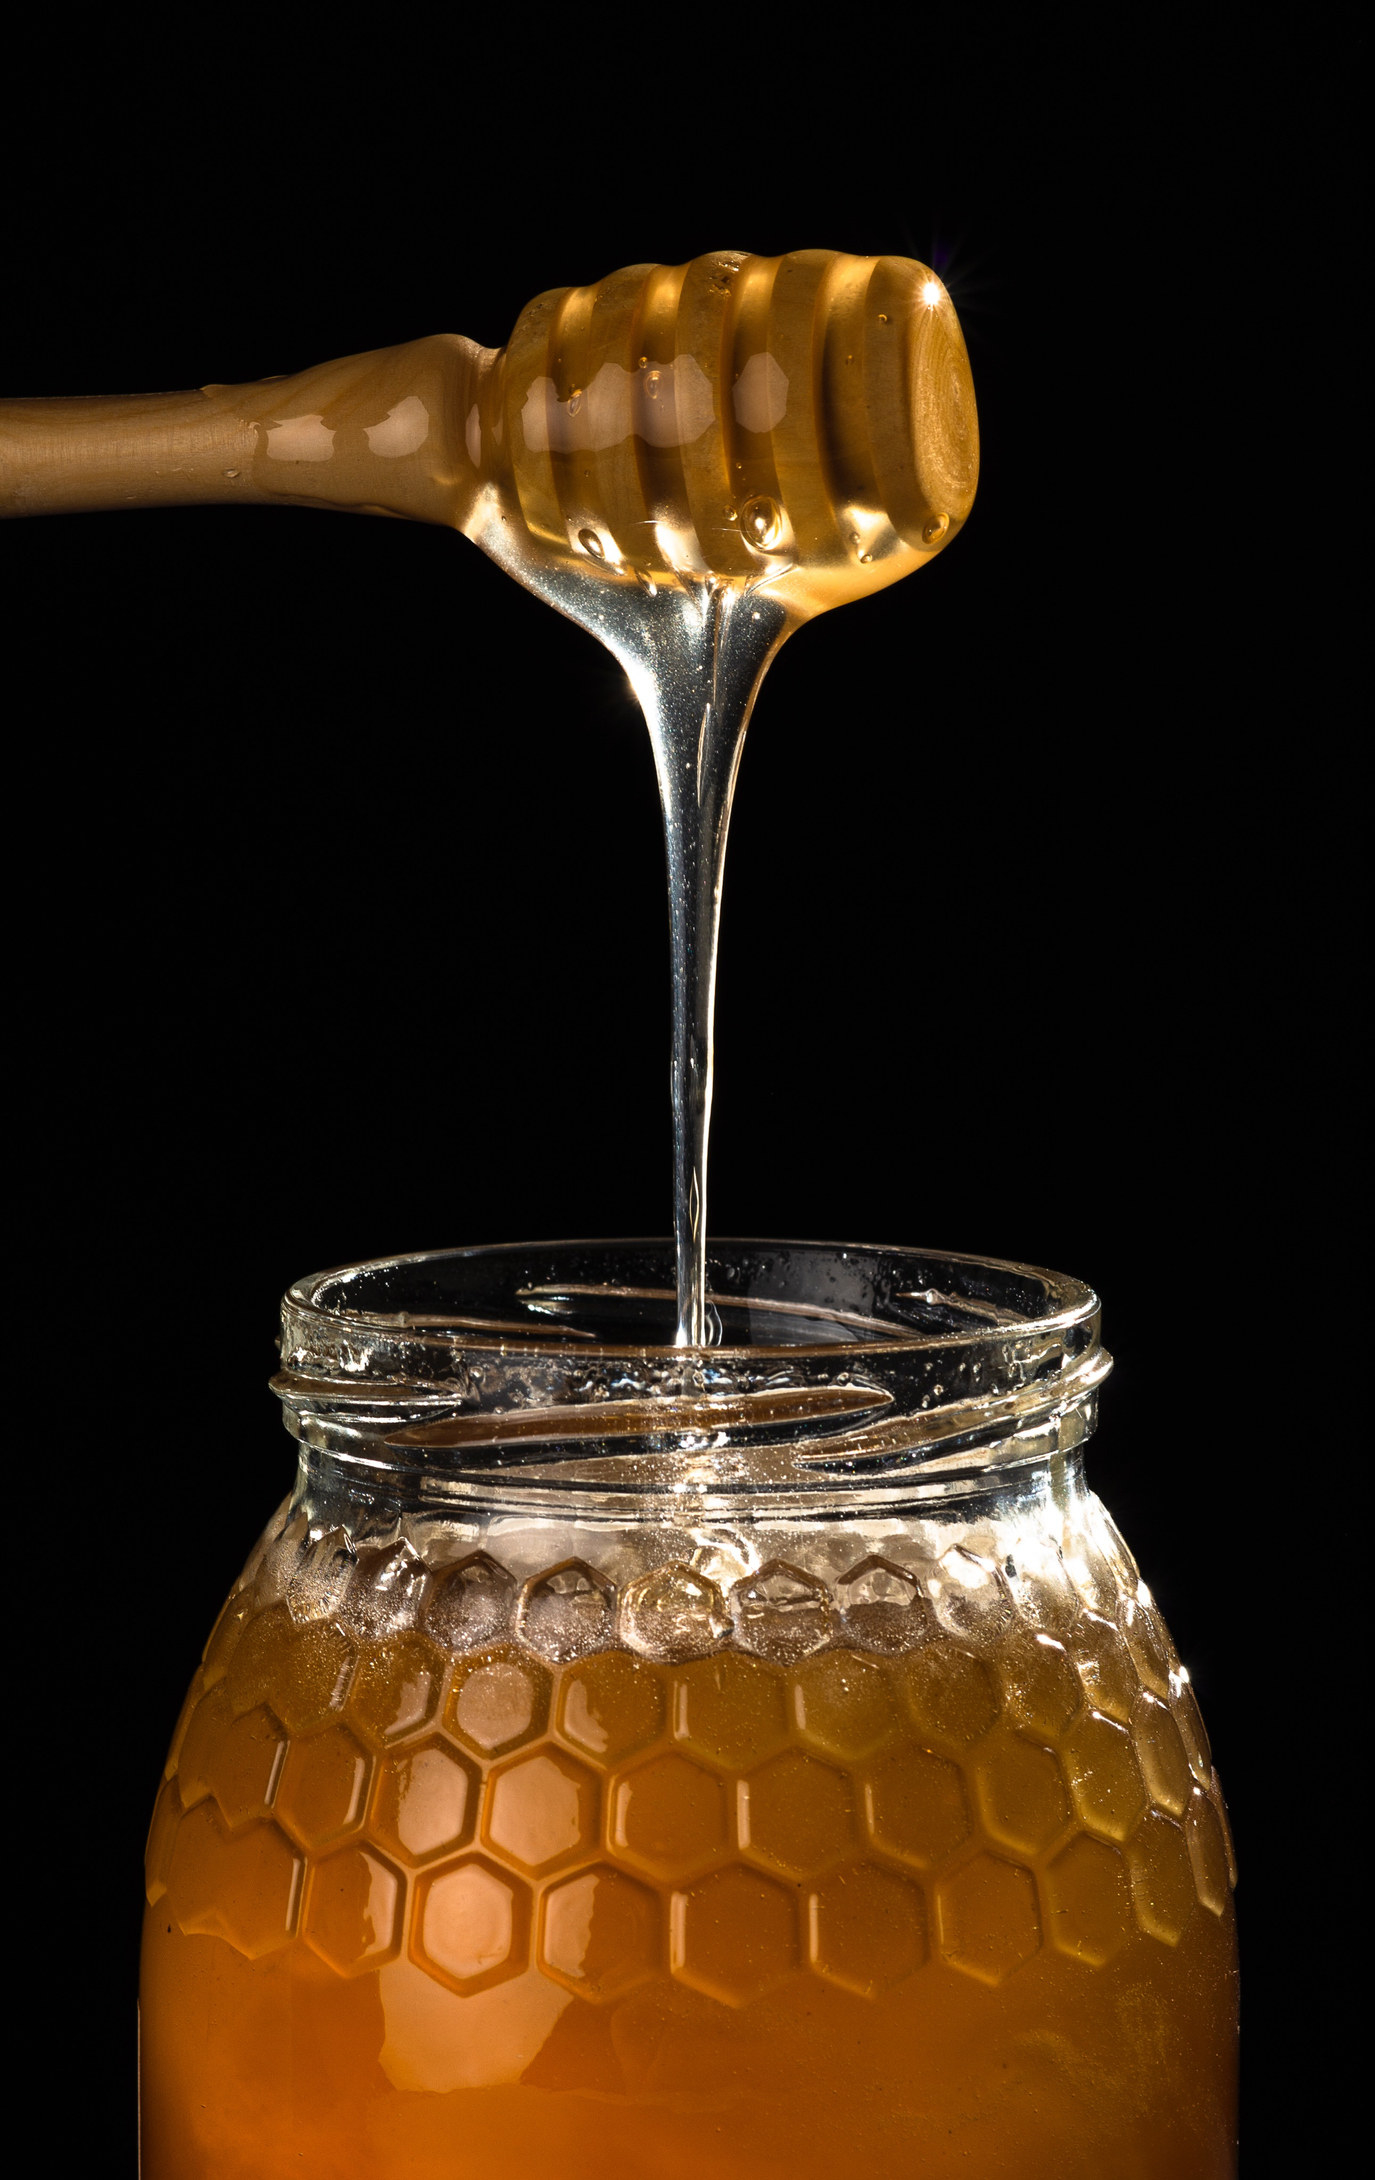 Honey being scooped from a jar